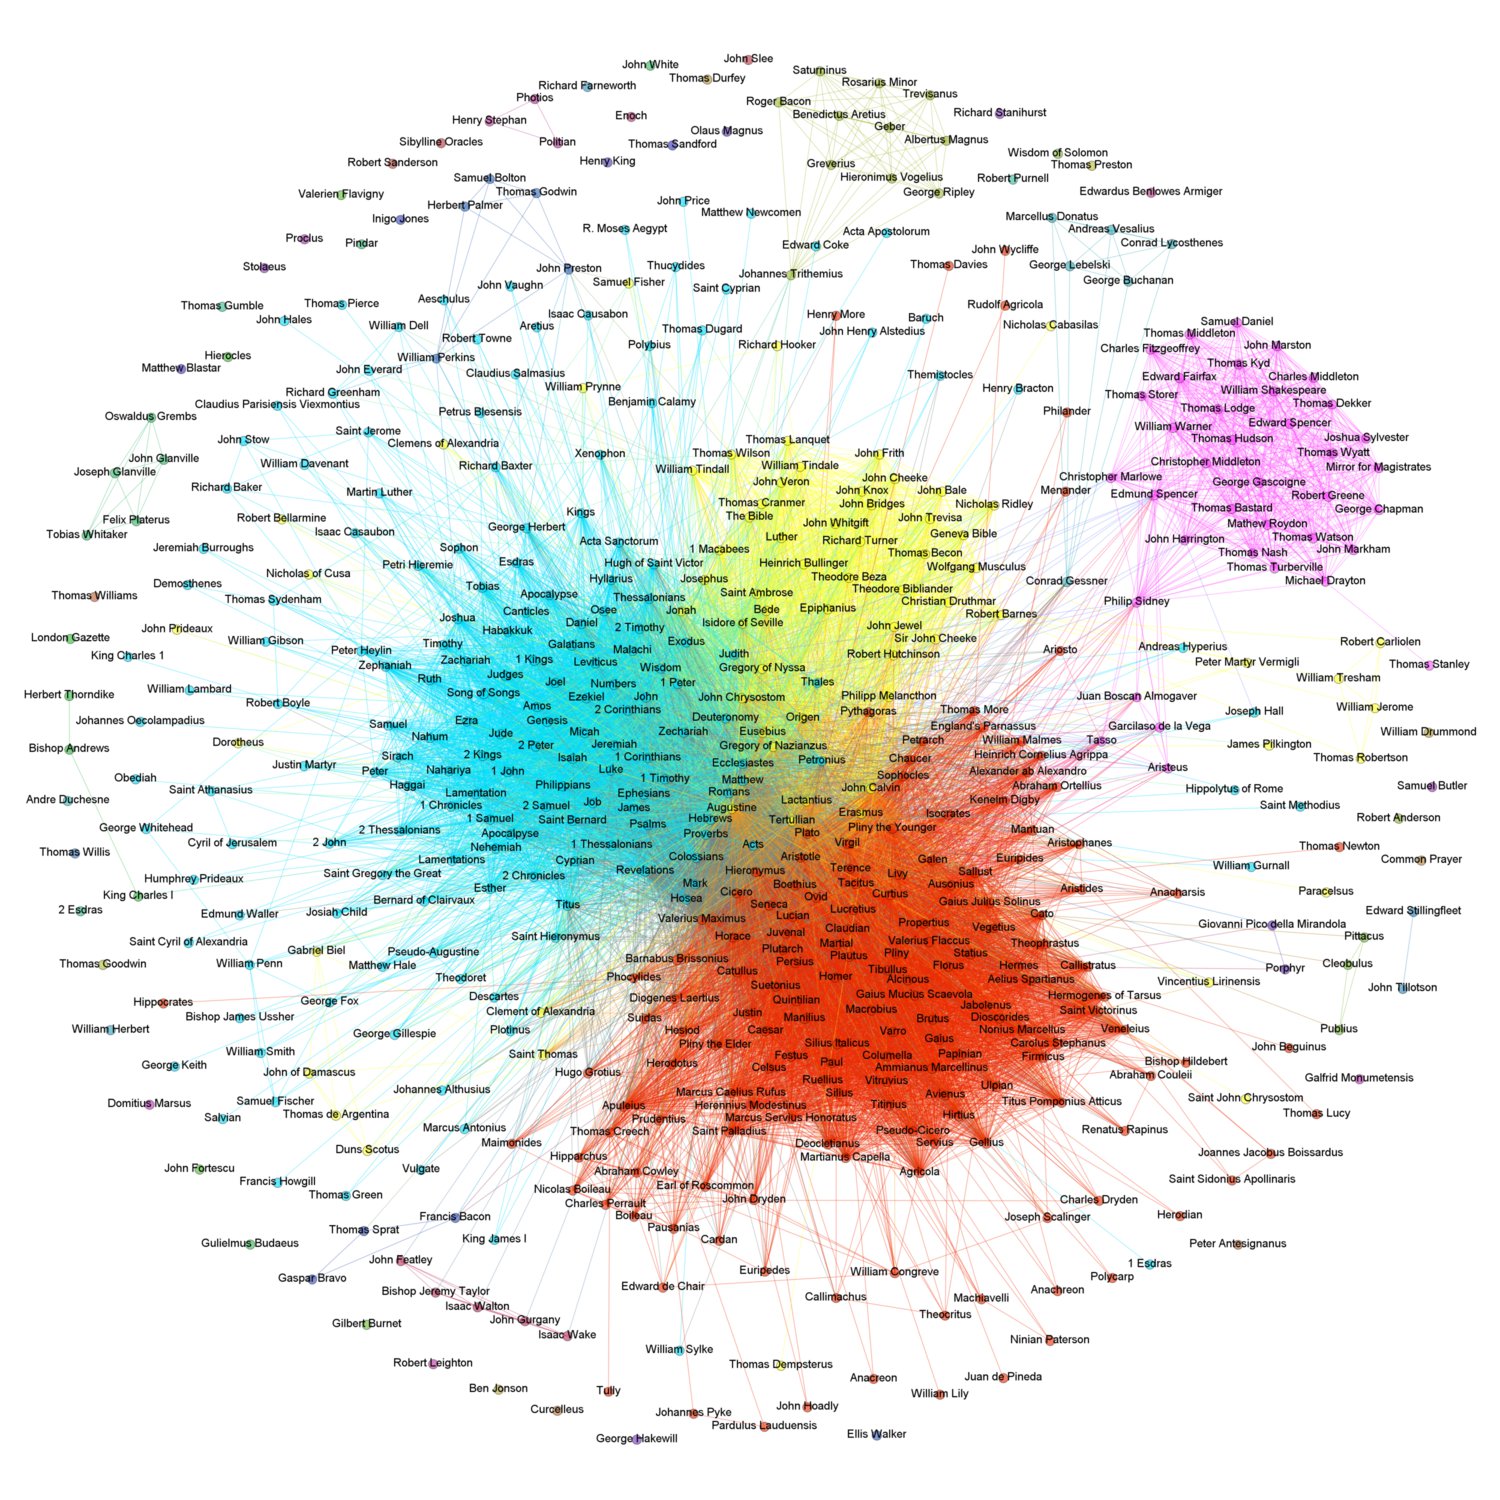 Preview of an interactive page on which users can interact with a network visualization of EEBO TCP cocitations.